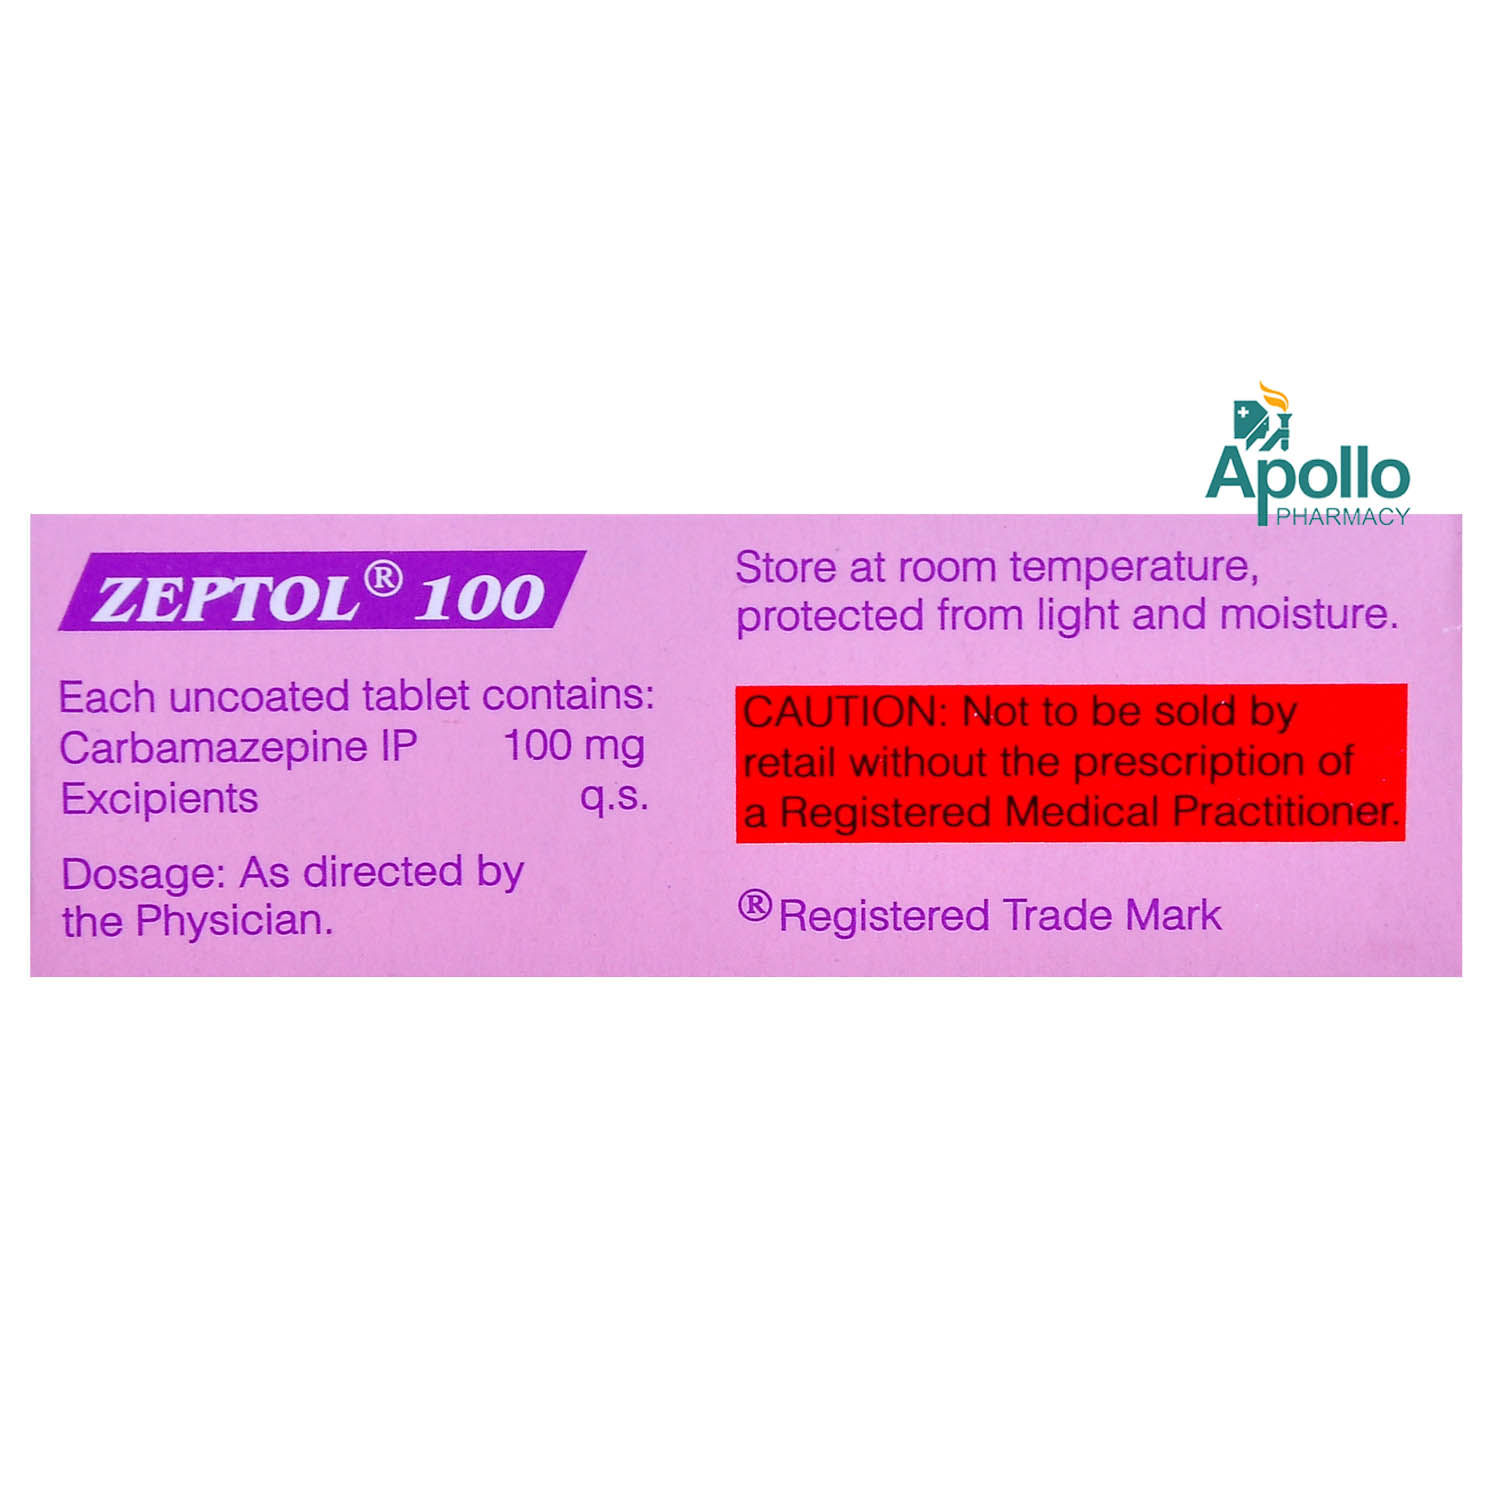 Zeptol 100 Tablet 10's Price, Uses, Side Effects, Composition - Apollo .